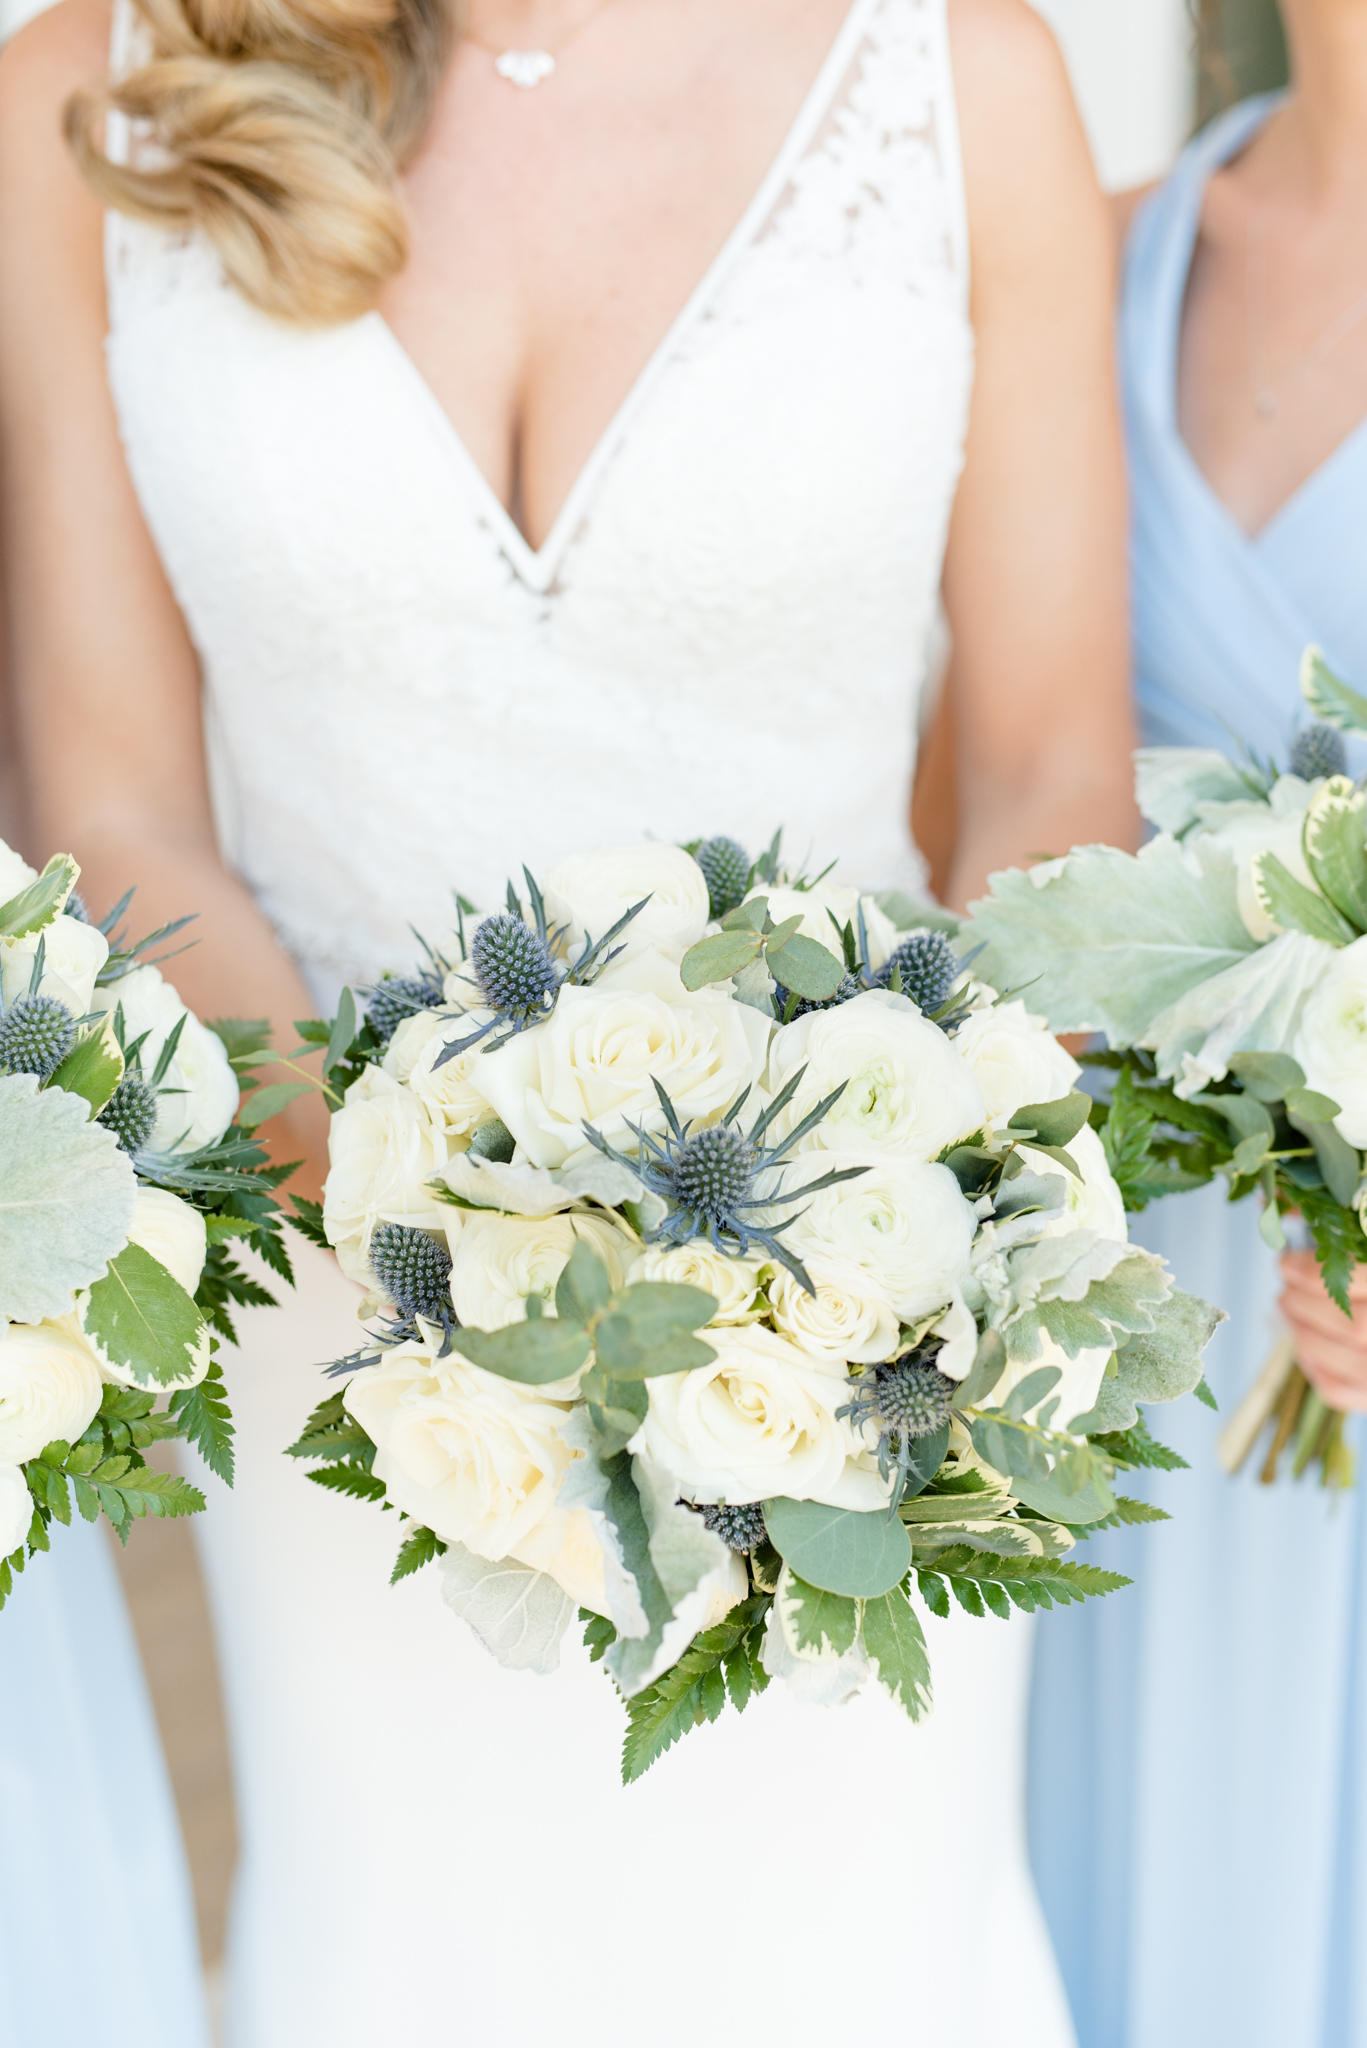 Bridal party holds Cream and blue Wedding flowers